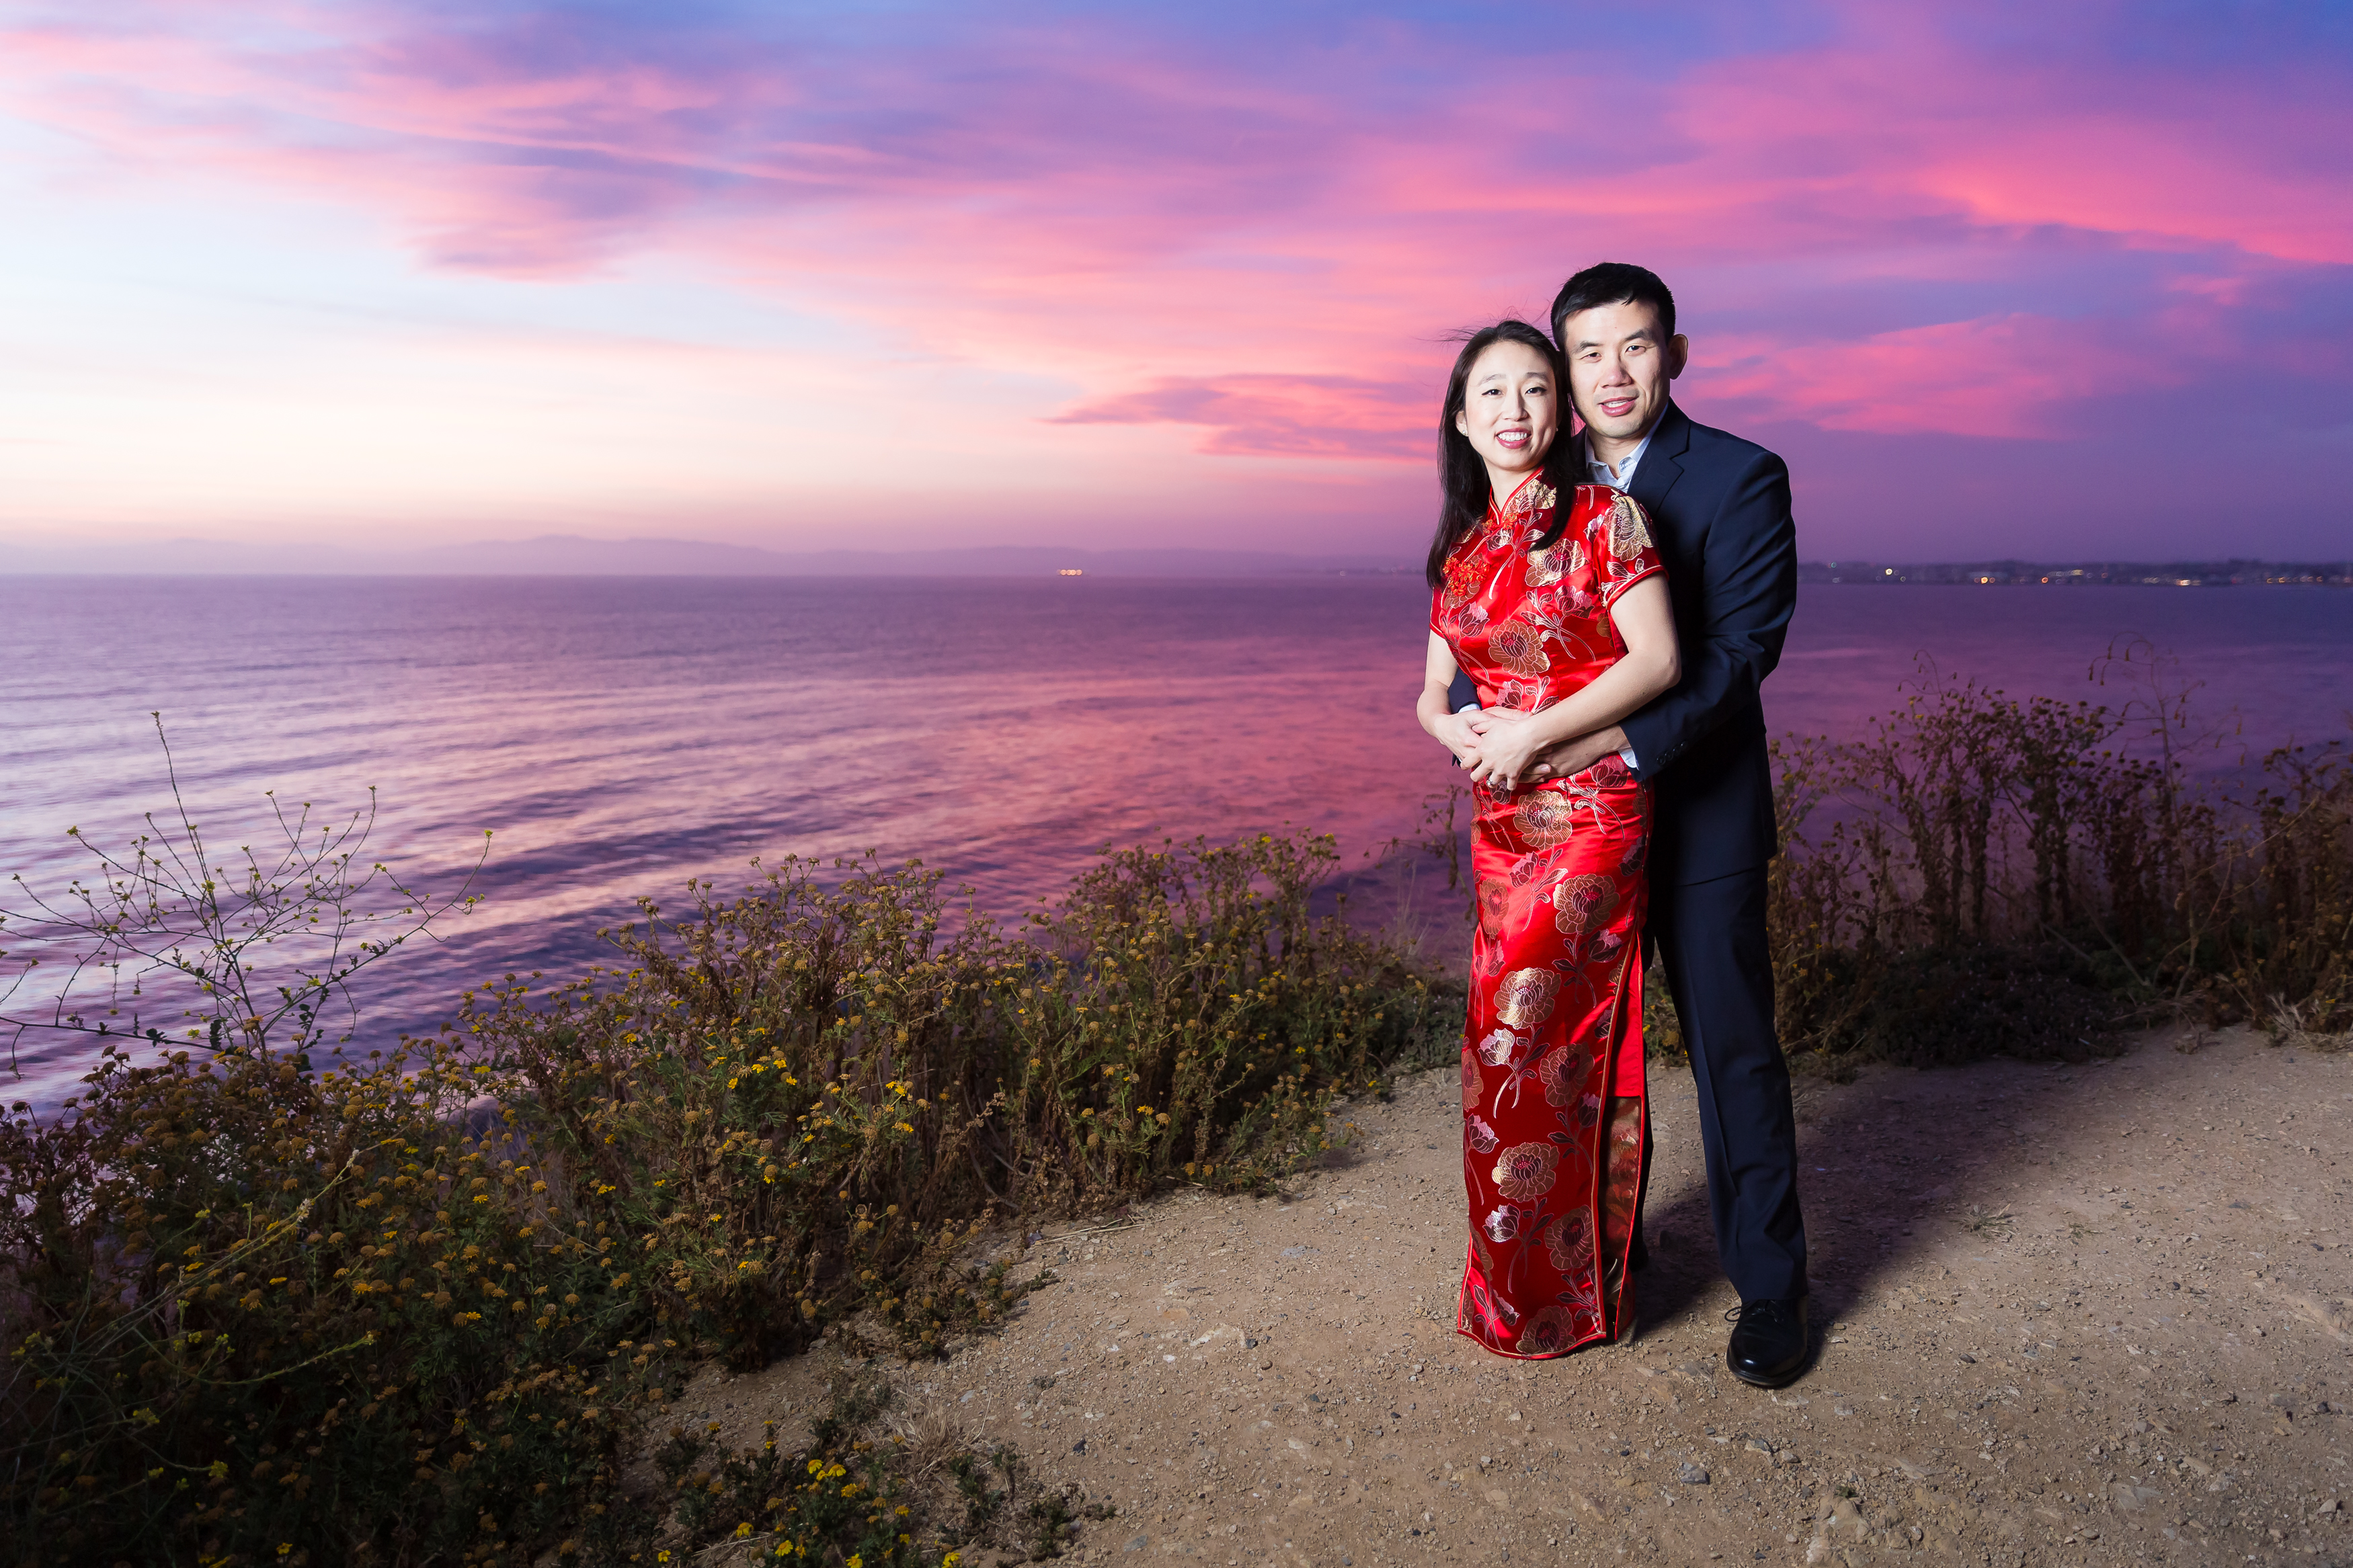 Man hugging woman on cliff edge during pink and purple sunset